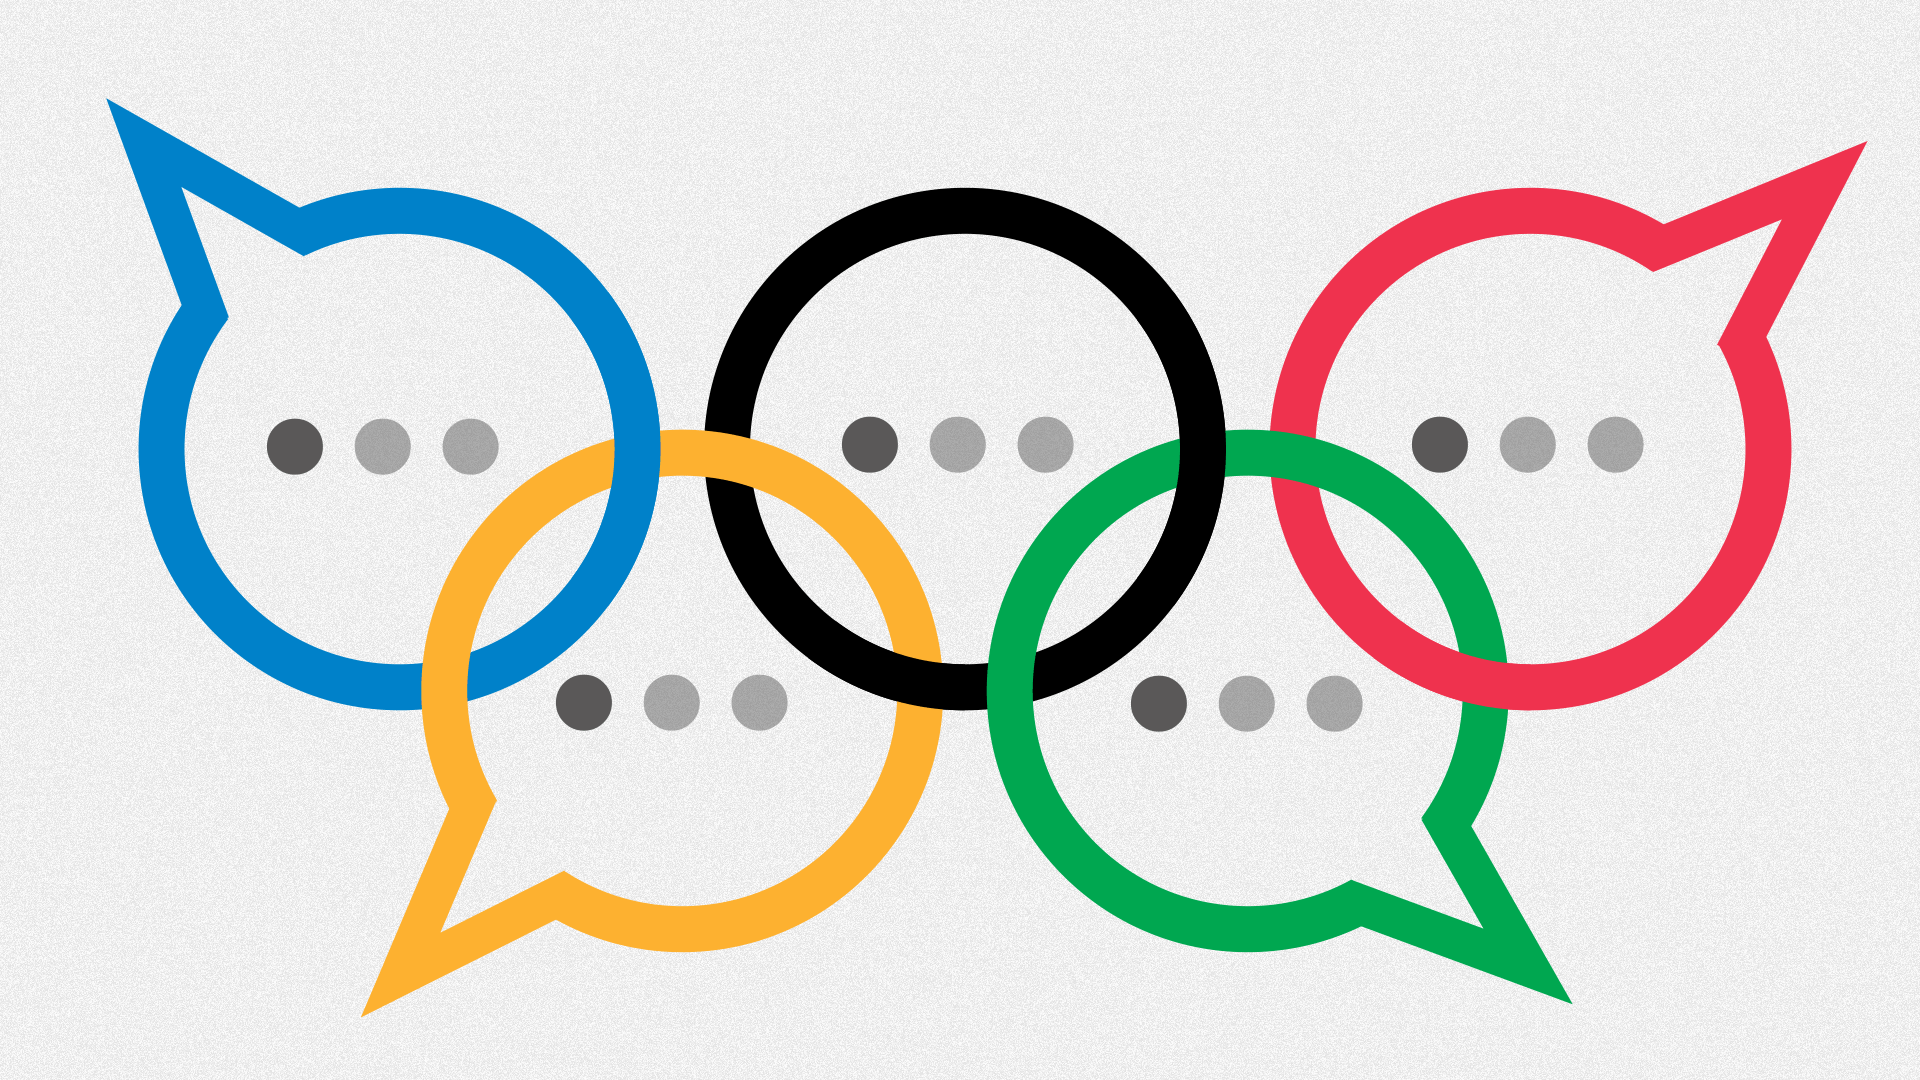 An animated graphic with chat icons made to resemble the Olympic Rings